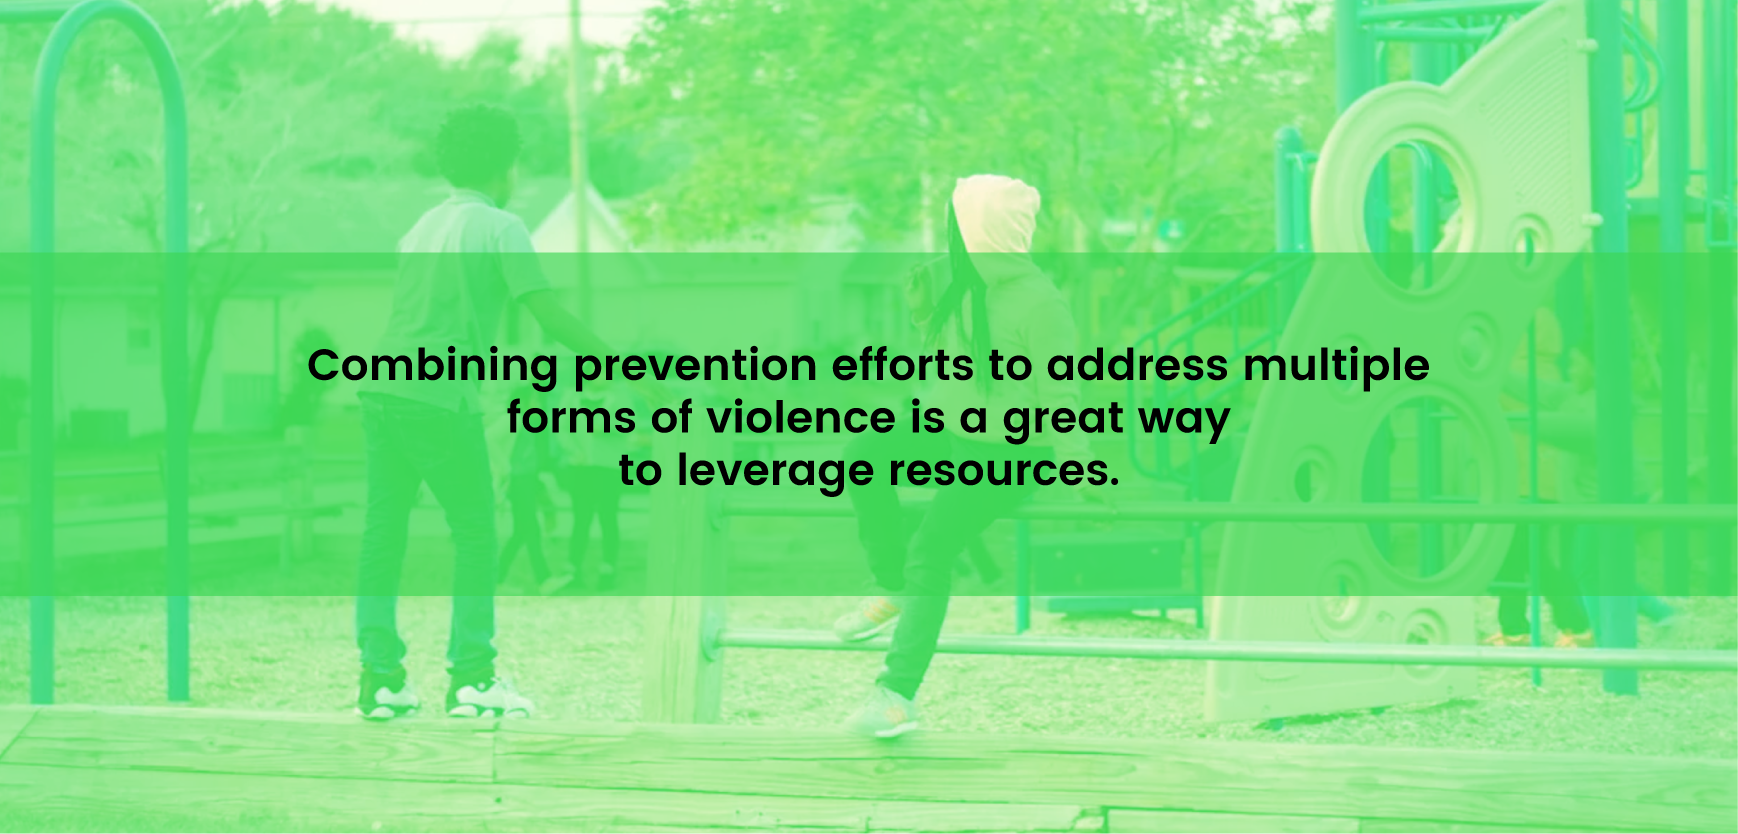 Combining prevention efforts to address multiple forms of violence is a great way to leverage resources